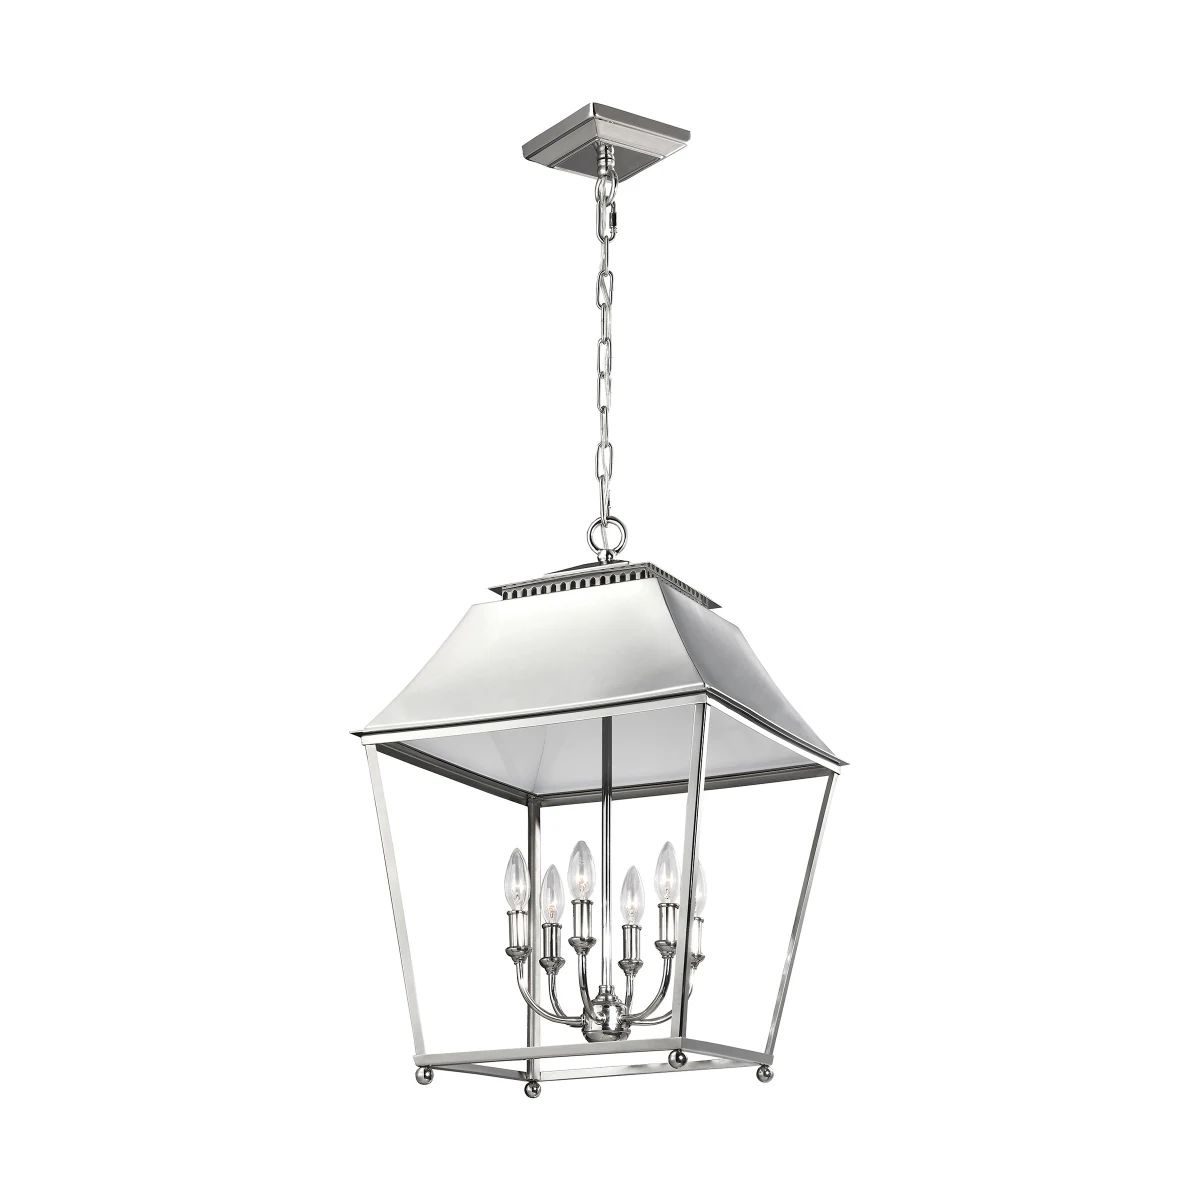 Galloway 6 Light 16" Wide Taper Candle Chandelier | Build.com, Inc.